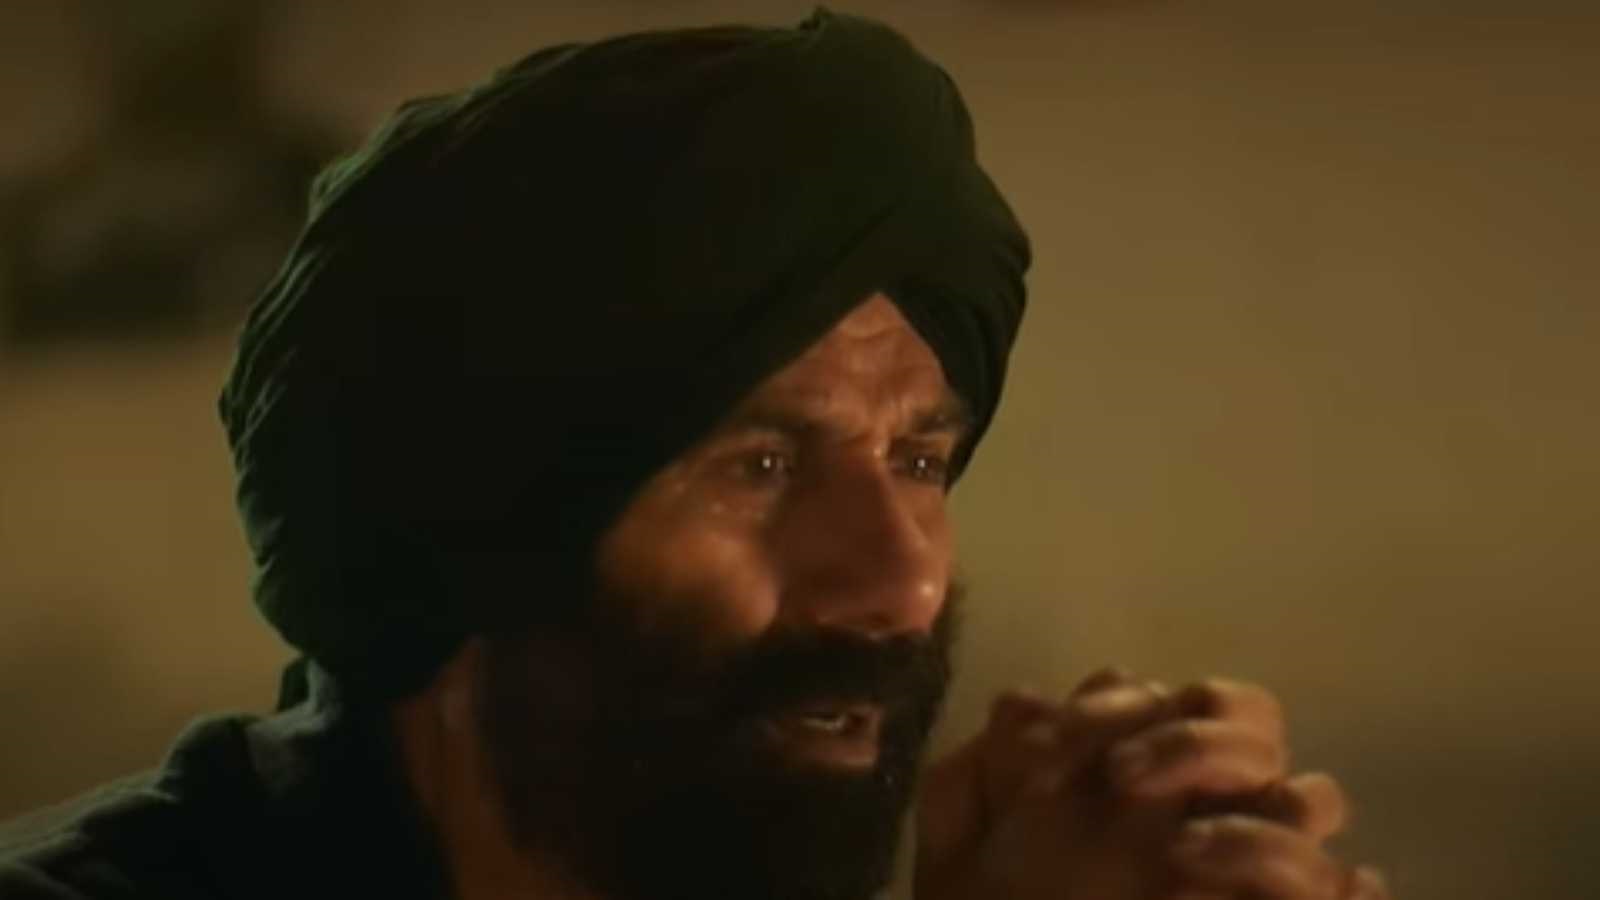 Sunny Deol returns as the savior in the teaser of Gadar 2, amidst the Crush India movement, with fans praising Tara Singh as an ’emotional’ character